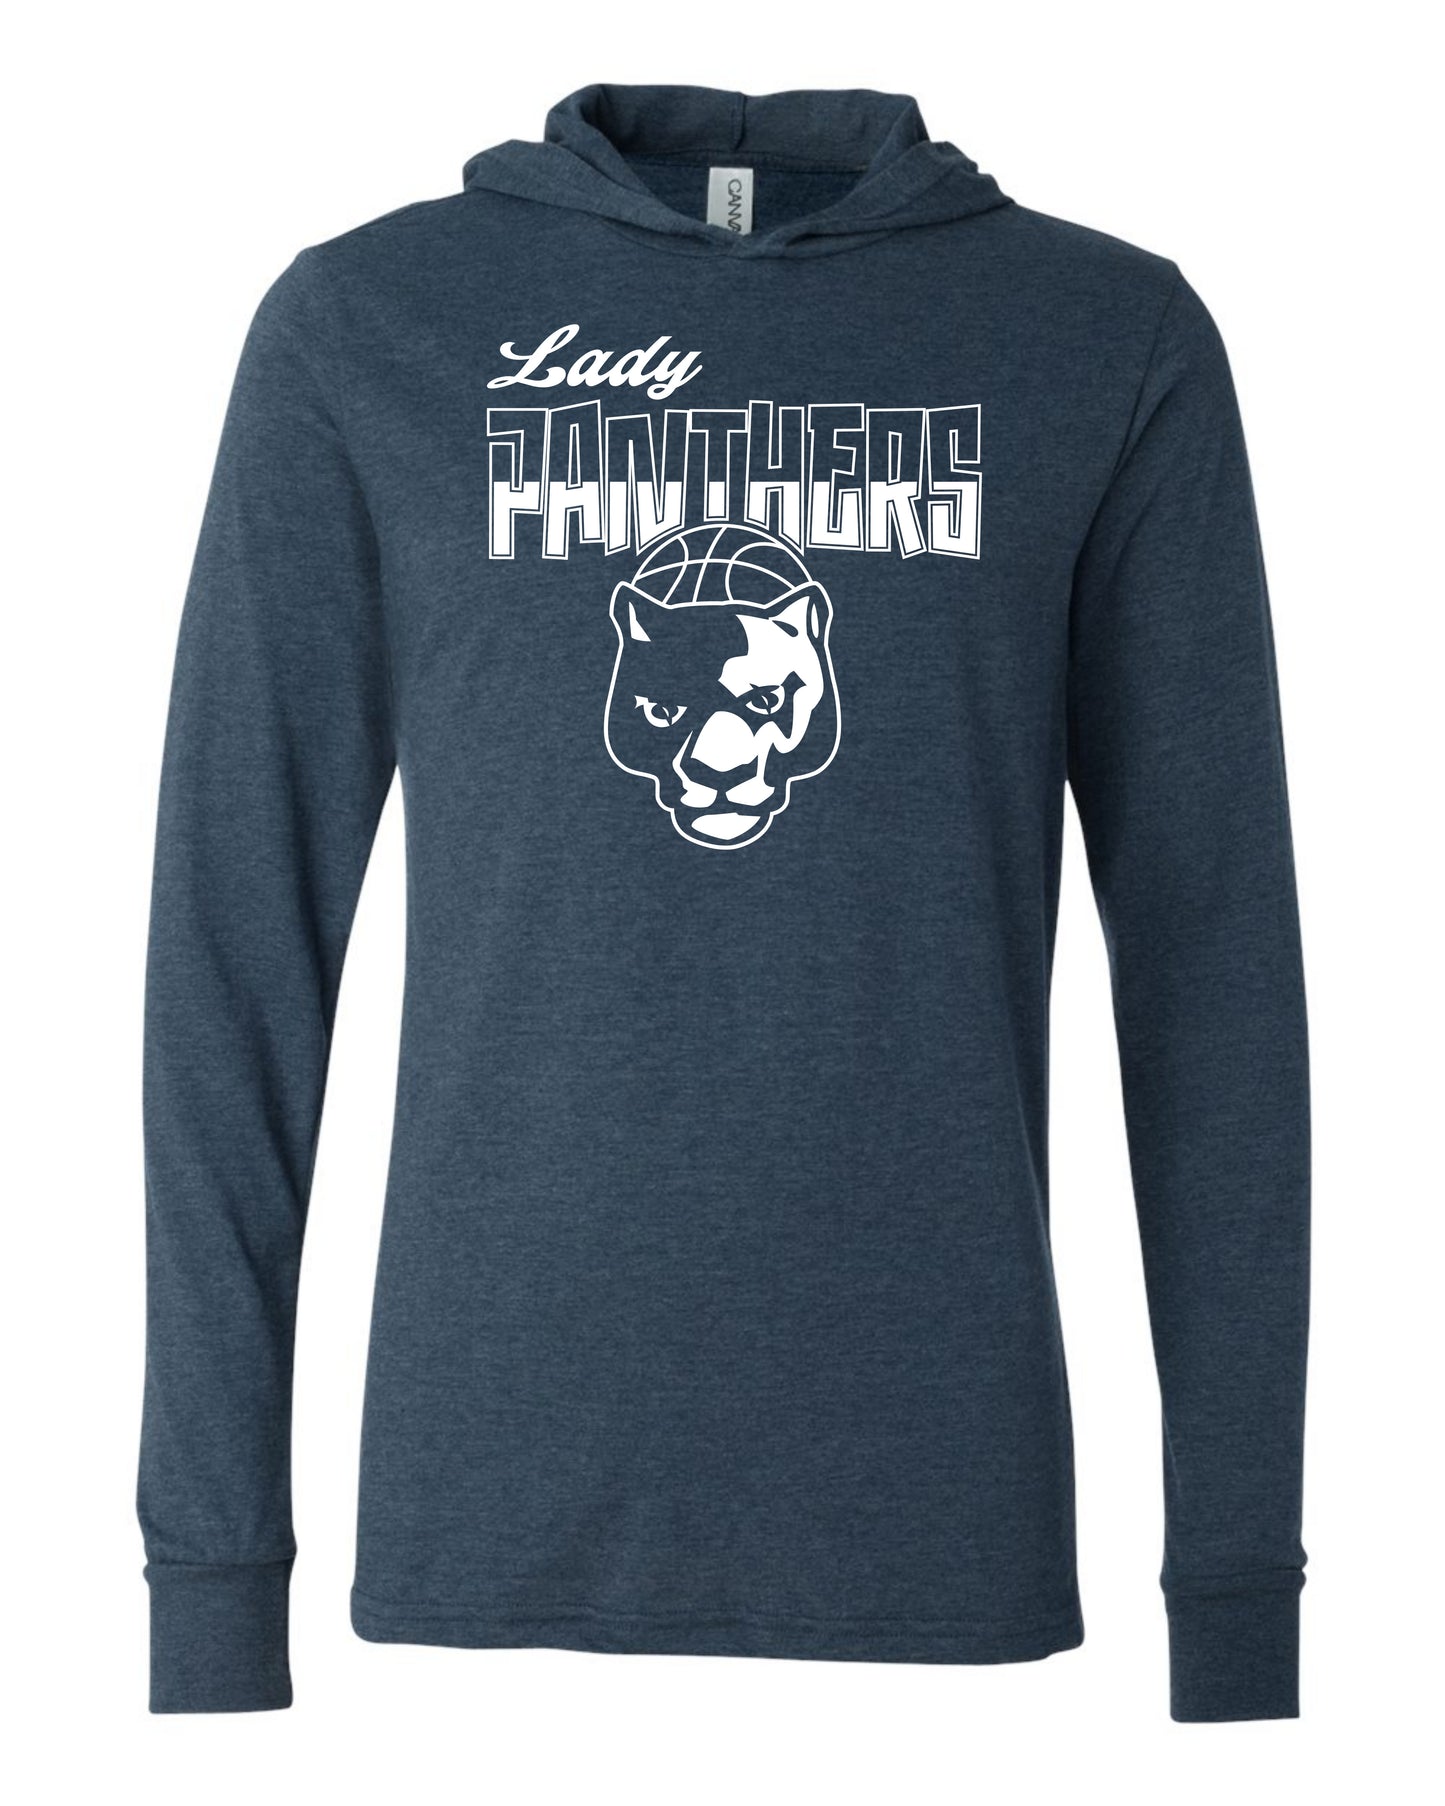 Lady Panthers Two-Tone - Adult Hooded Long Sleeve